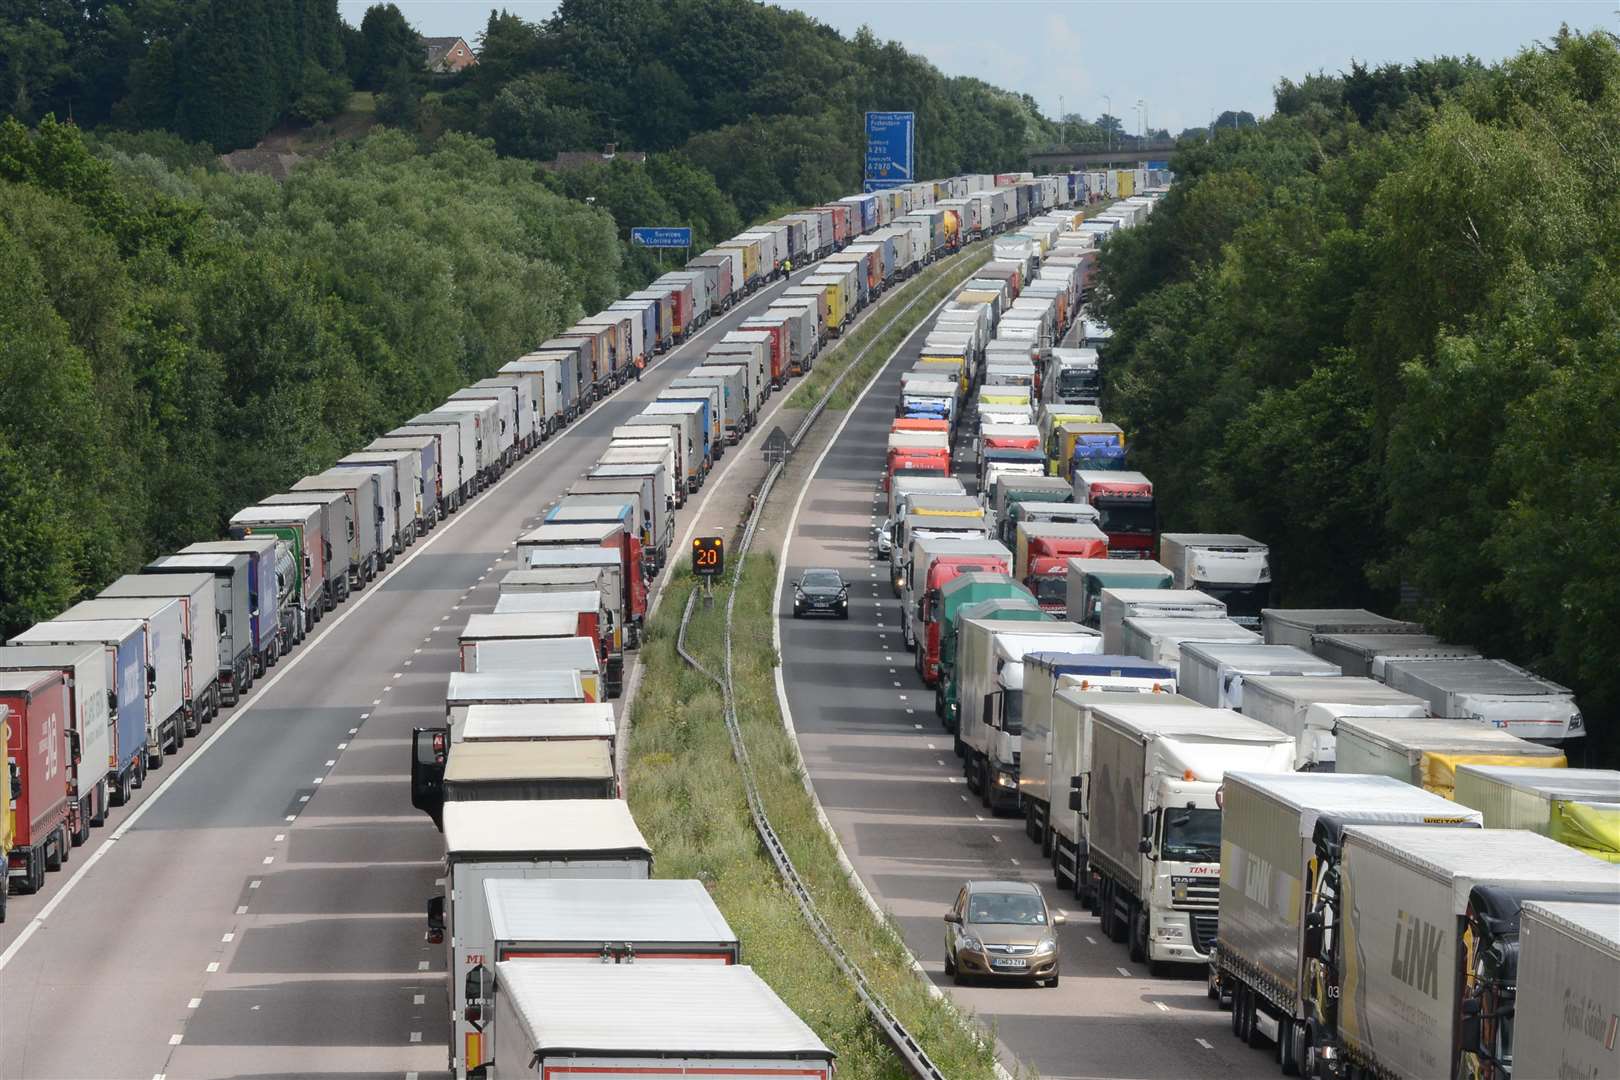 Operation Stack between Junction 9 and 10 of the M20